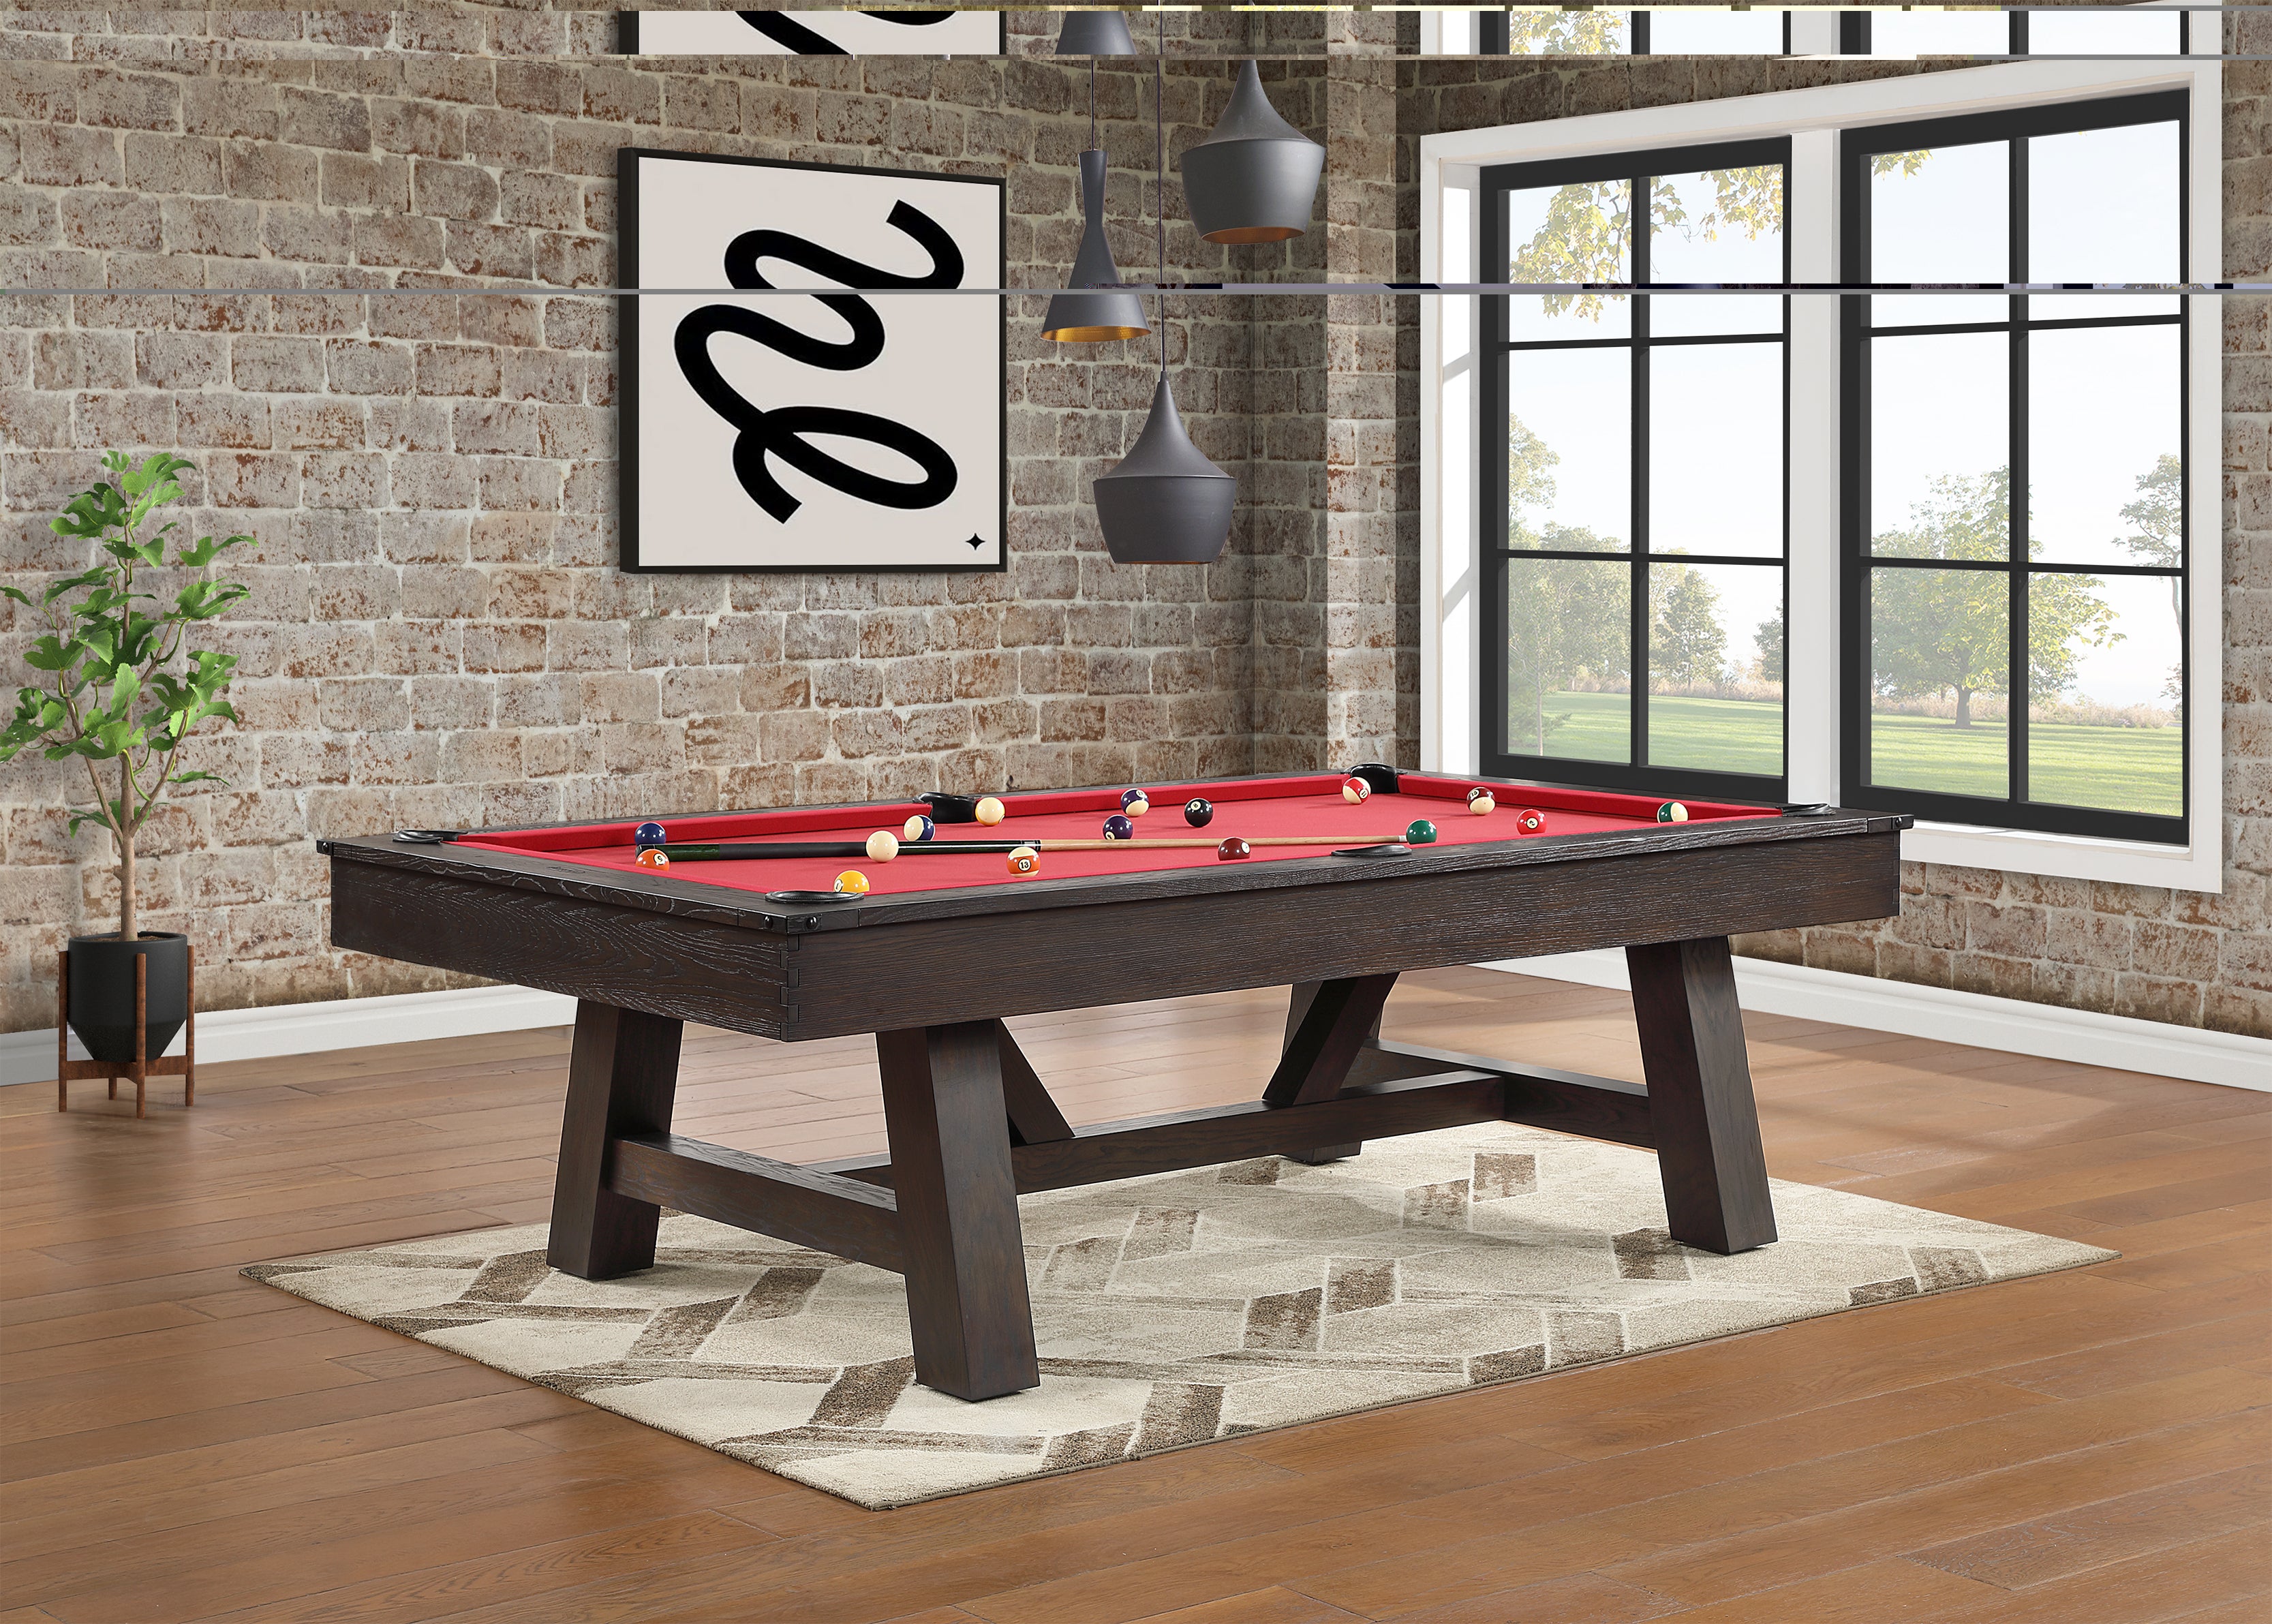 Legacy Billiards Emory Pool Table in Whiskey Barrel Finish Room Scene - Angle View with Pool Balls